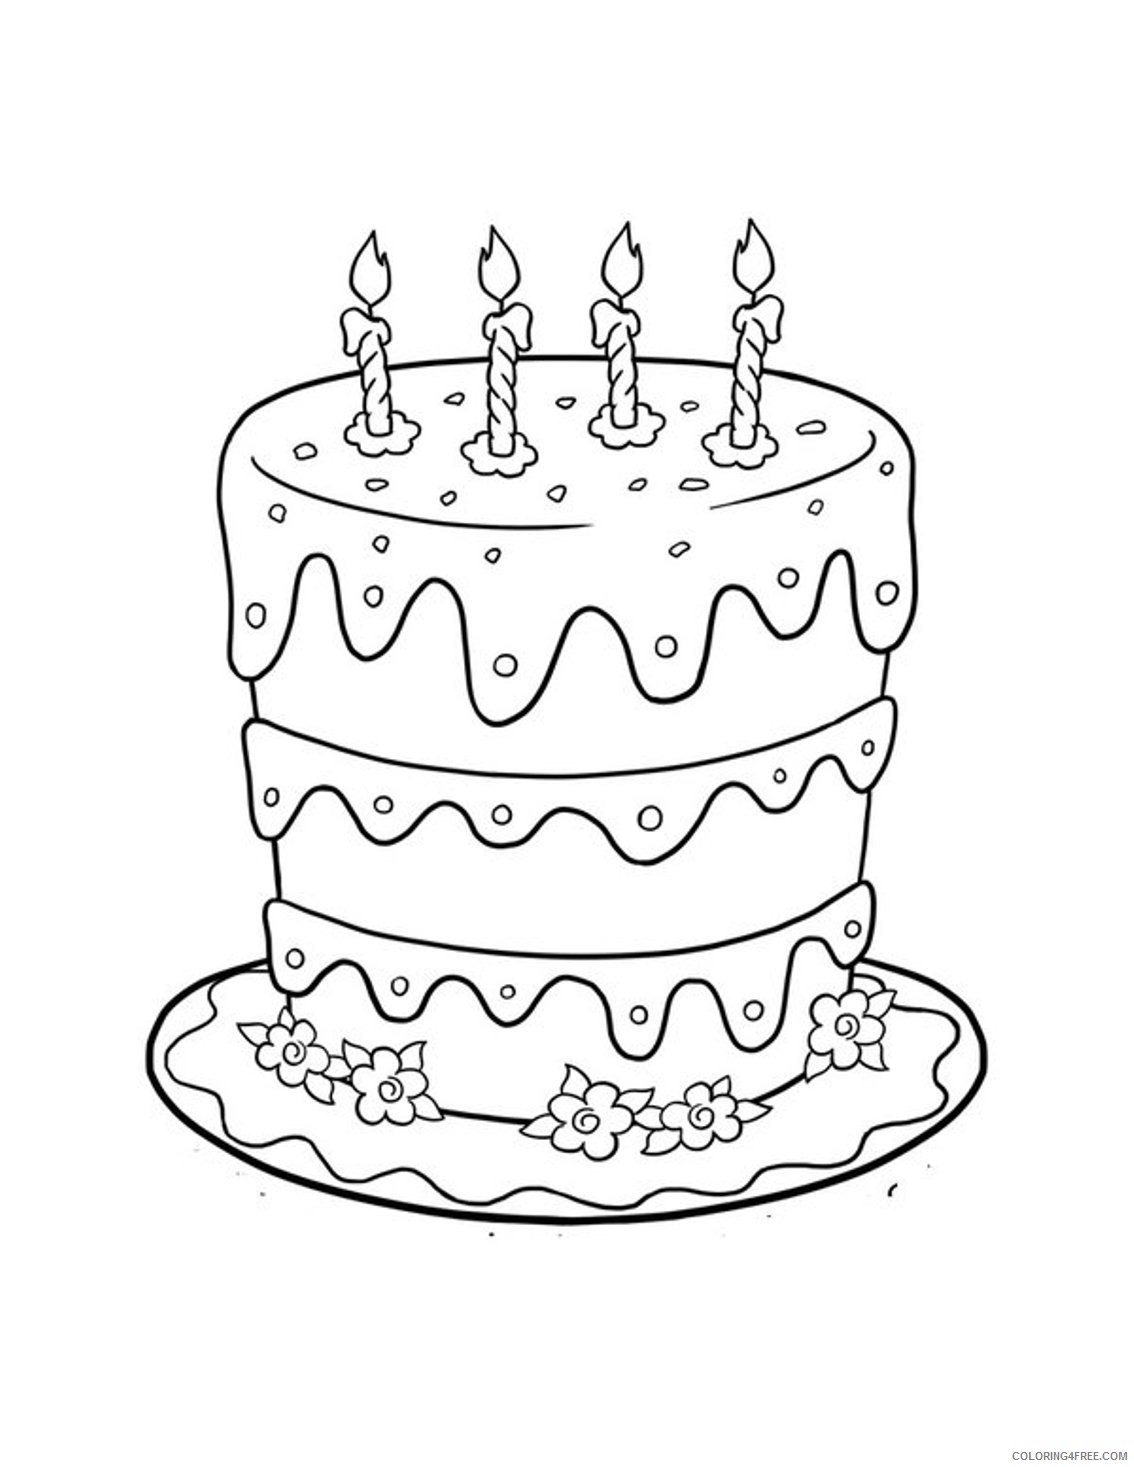 cute cake coloring pages to print Coloring4free